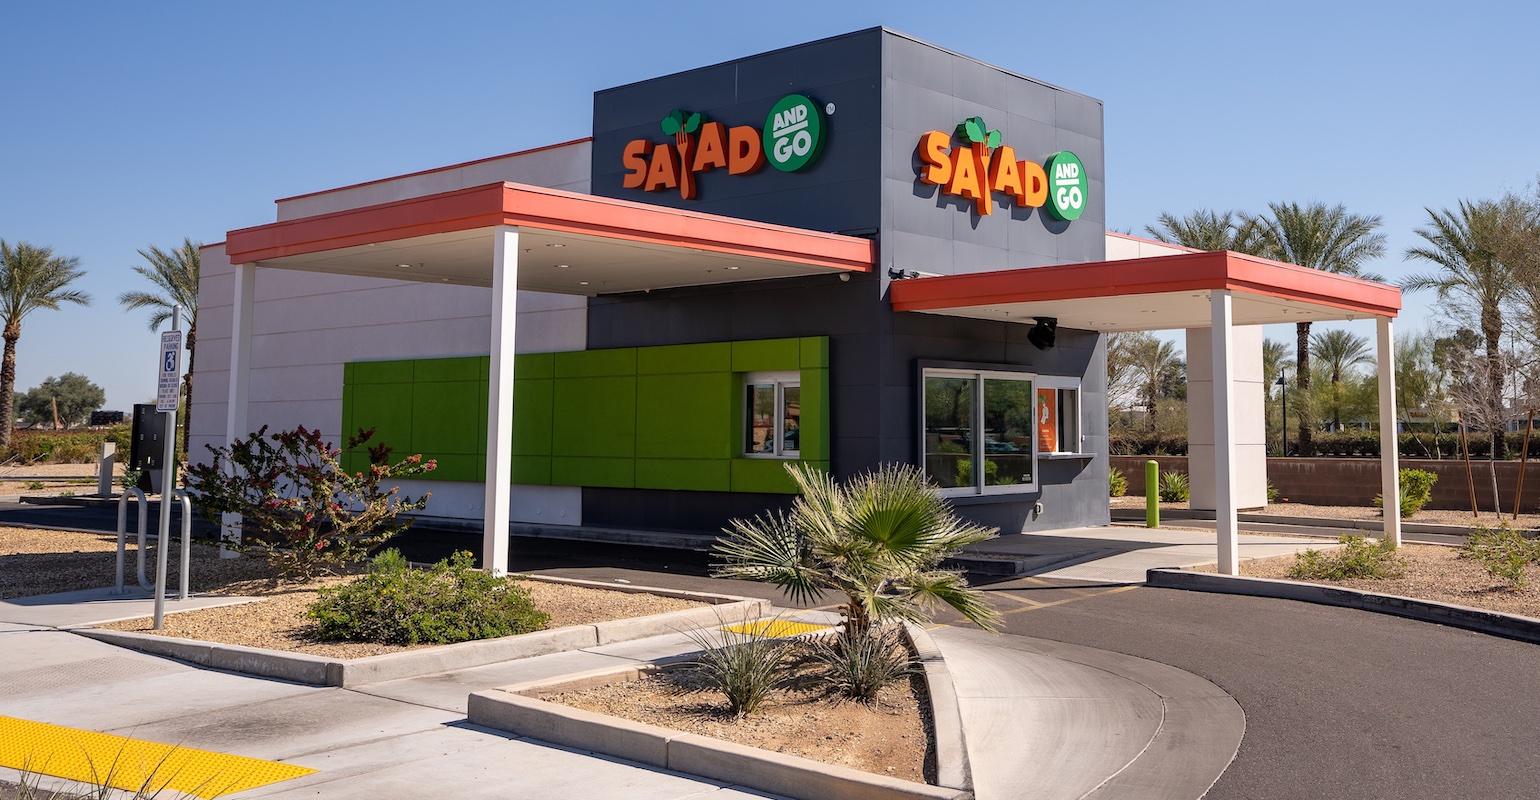 Salad and Go enters Nevada market amid fast growth pace